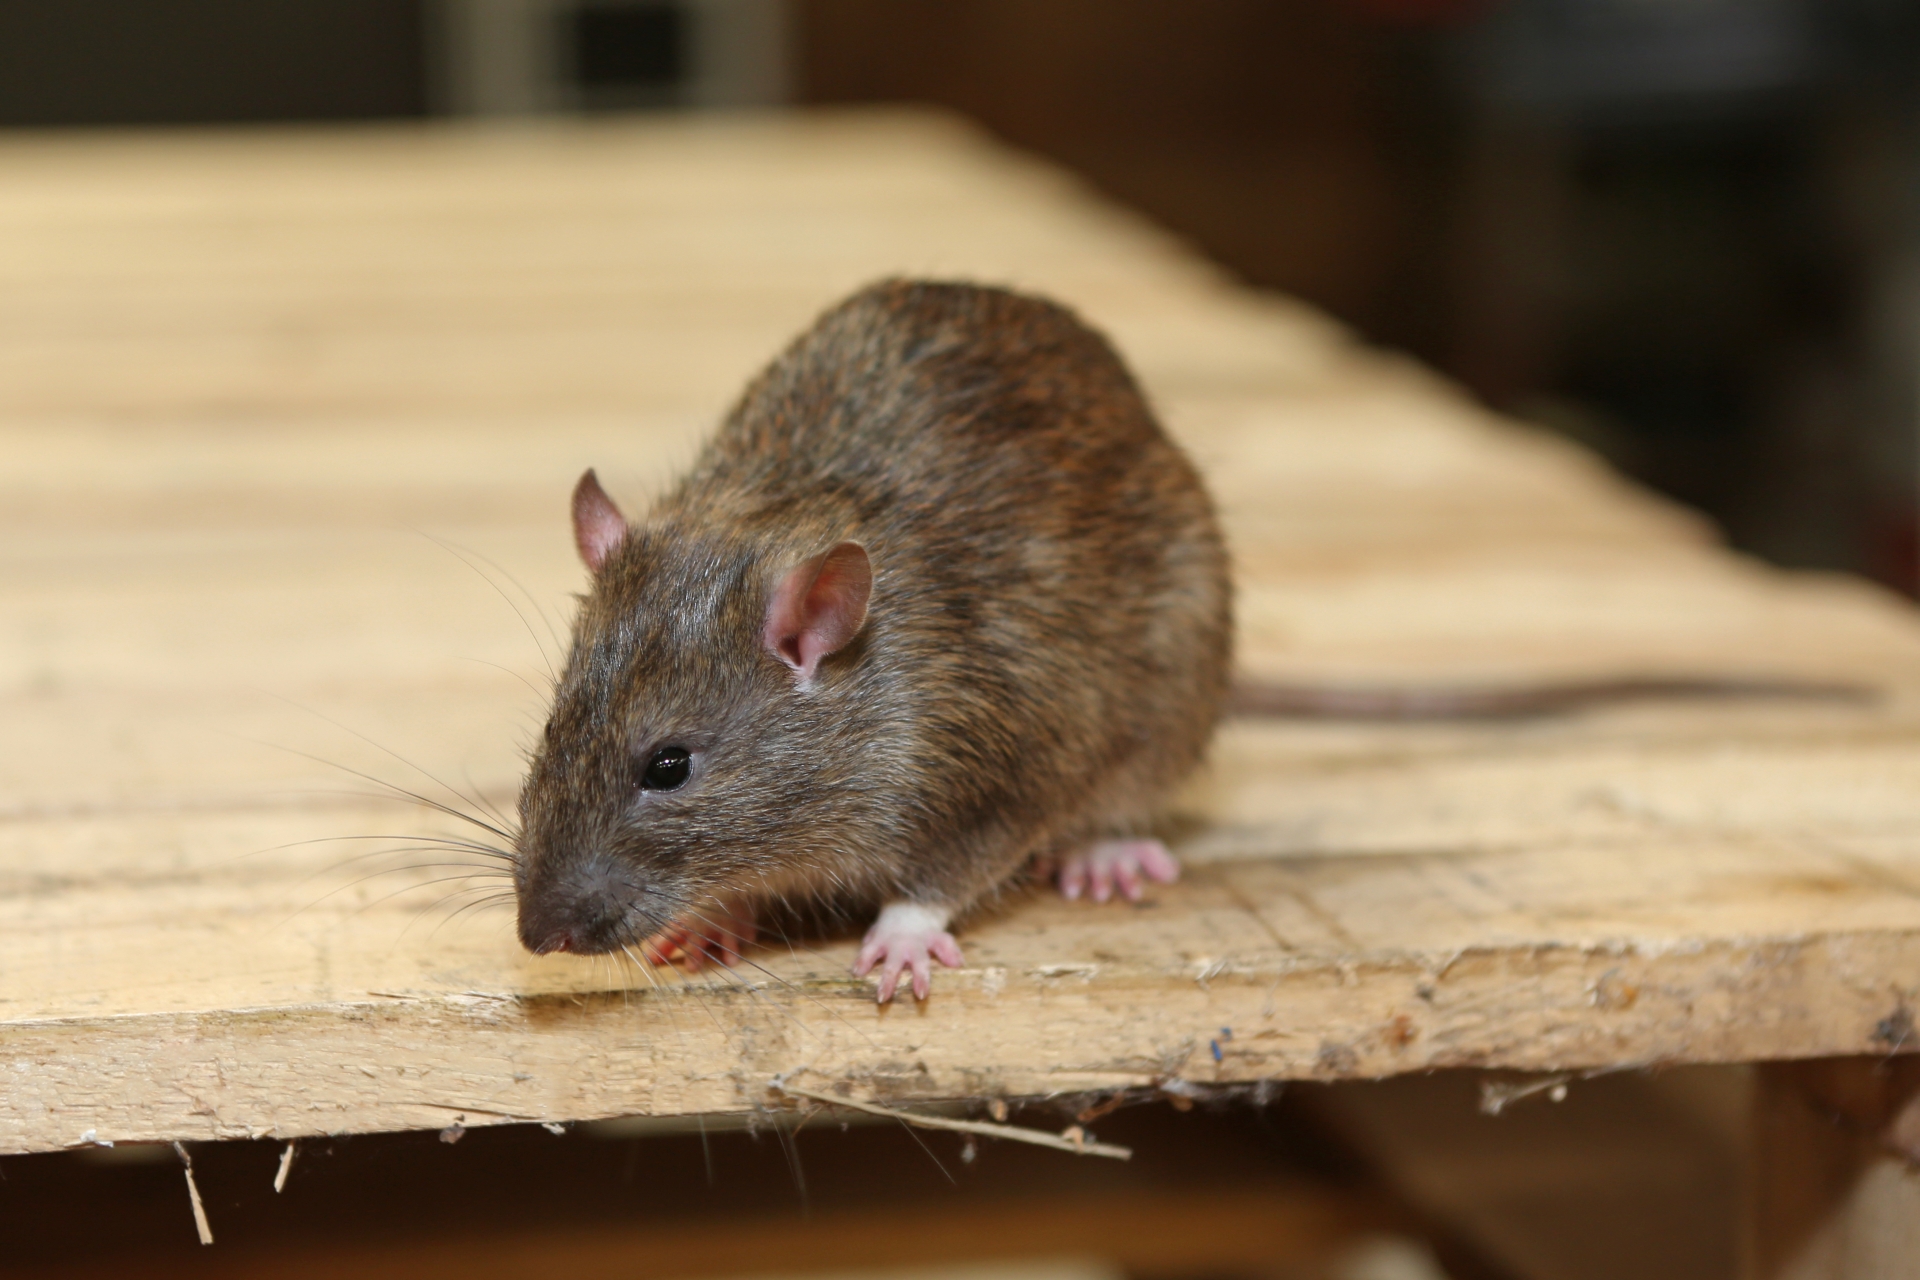 Rat Infestation, Pest Control in Pimlico, SW1. Call Now 020 8166 9746